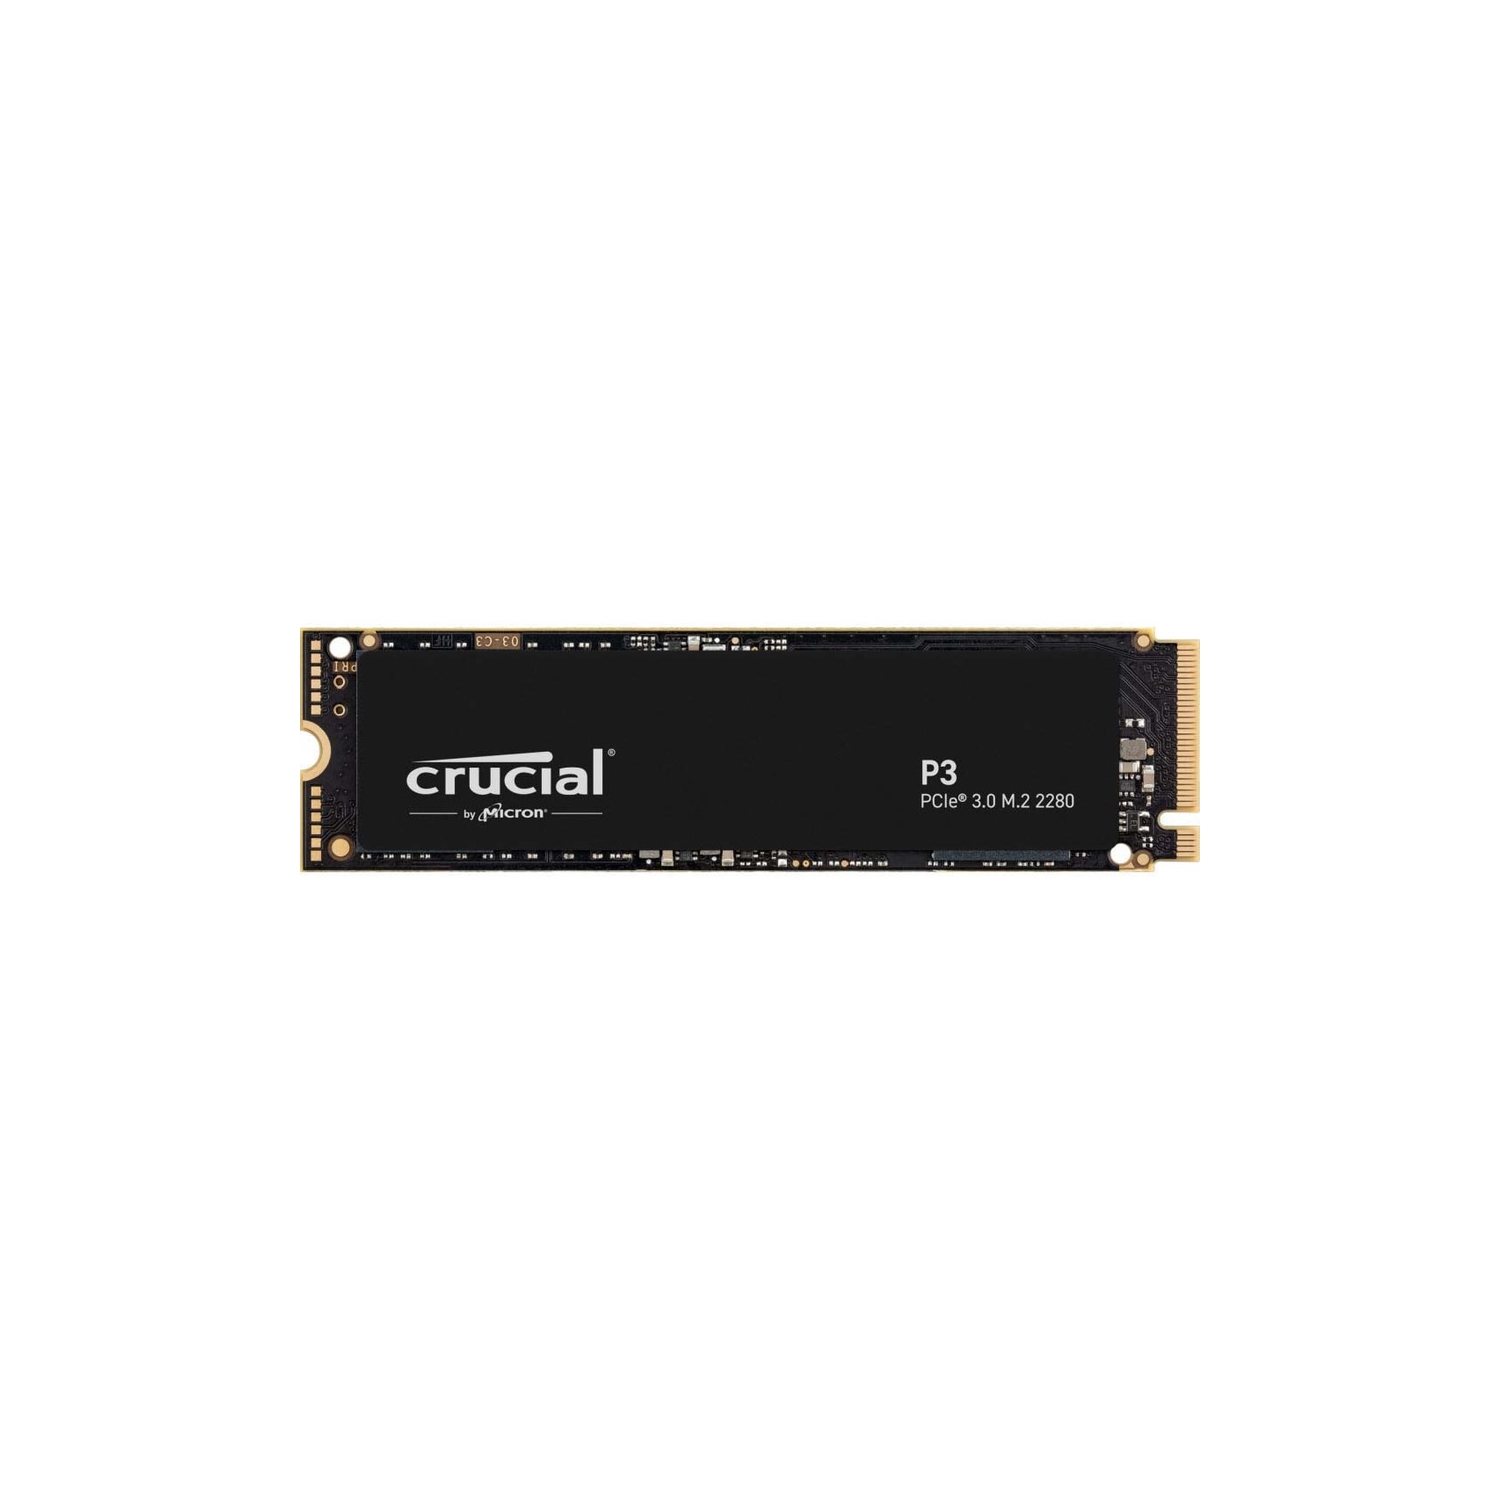 Crucial P3 3.0 NAND NVMe PCIe M.2 SSD CT1000P3SSD8